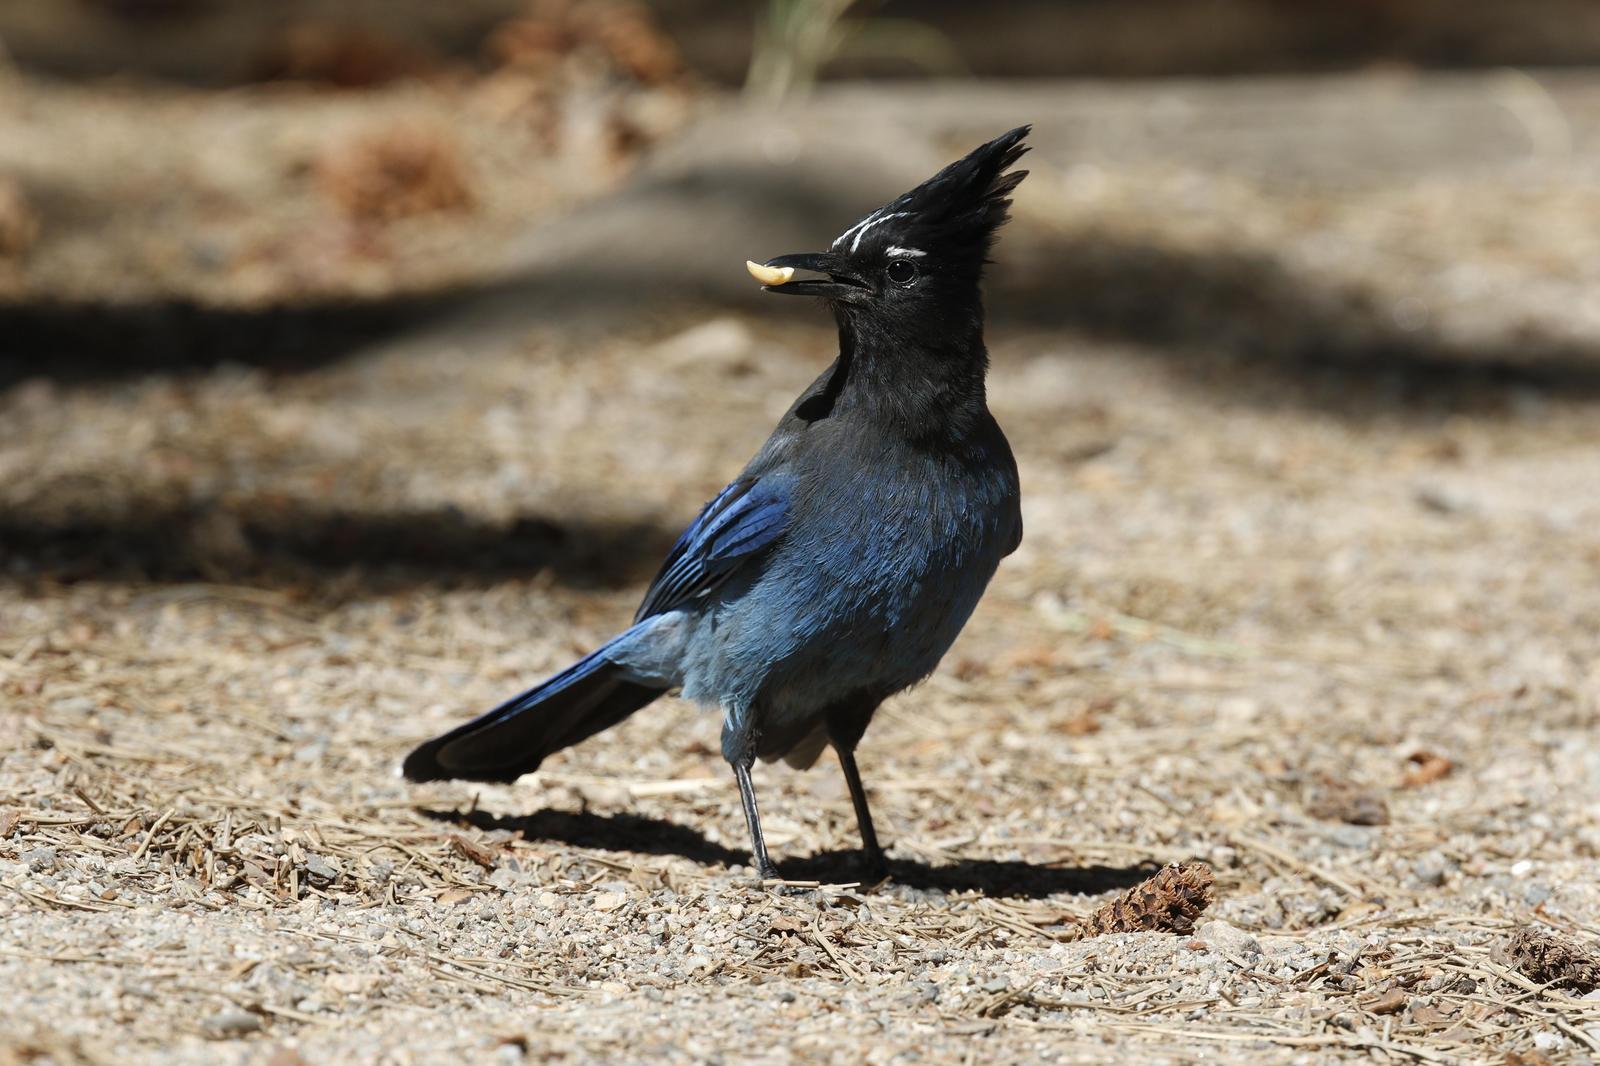 Steller's Jay Photo by Emily Willoughby